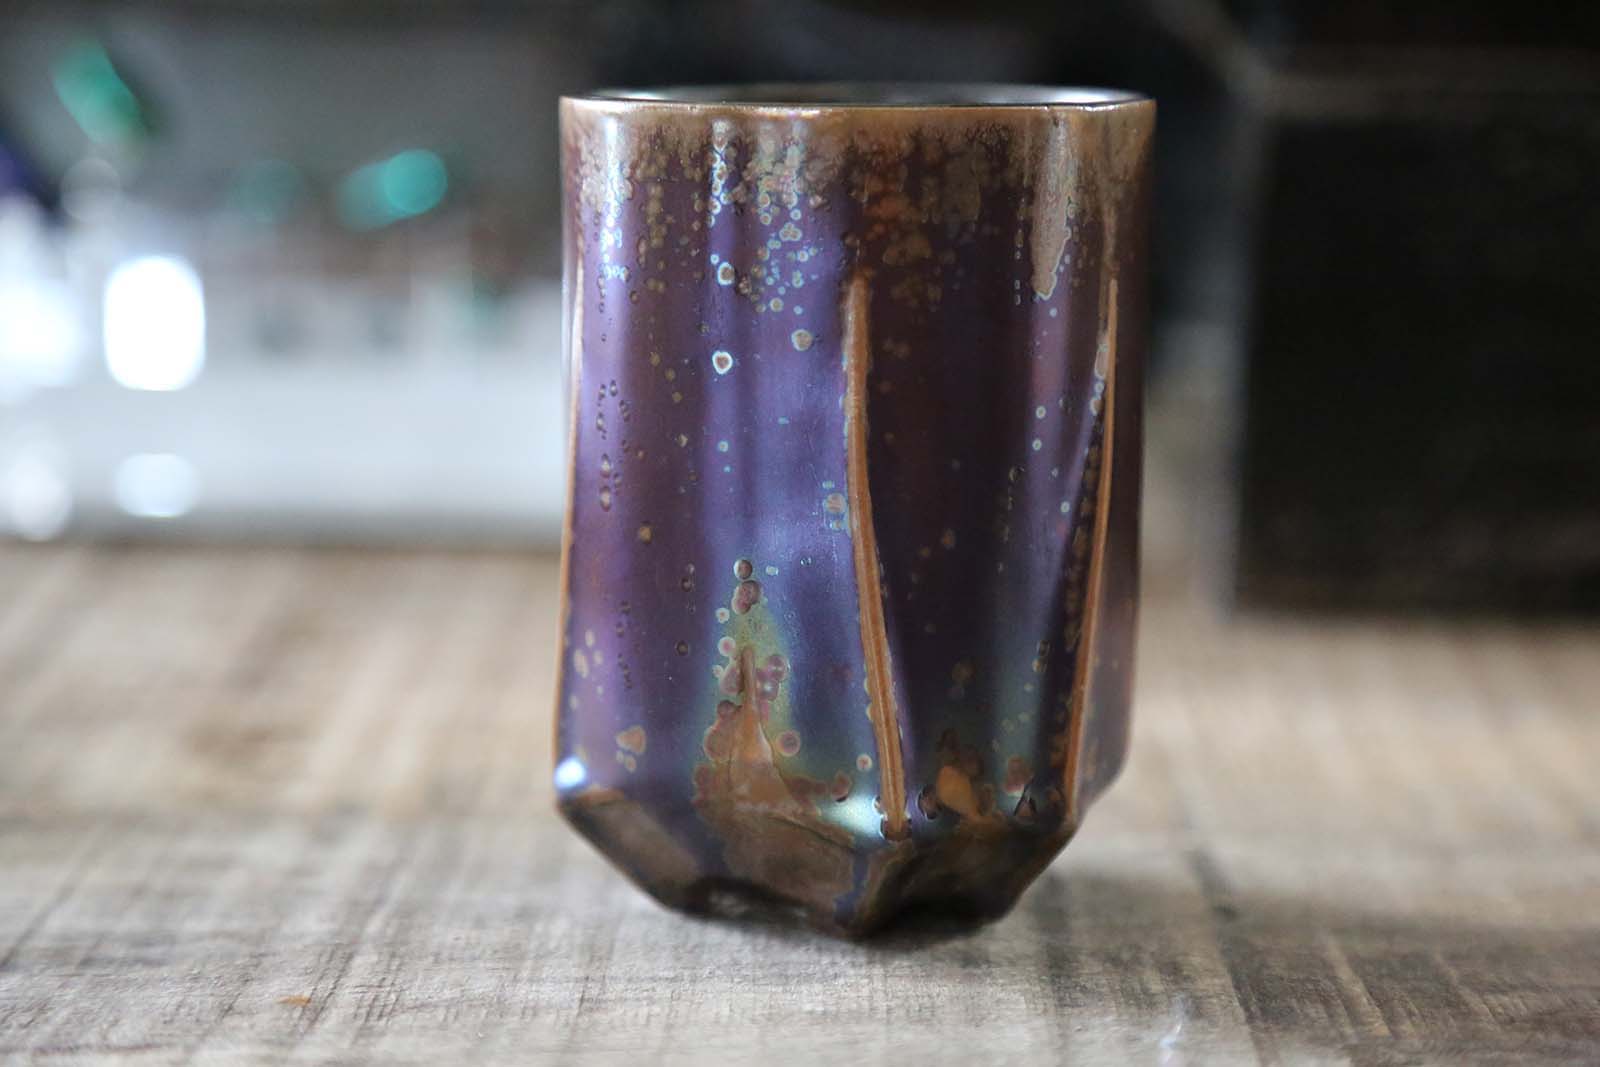 Sutherlin Santo, Jewel tumbler (purple), 4.25 in. (11 cm) in height, porcelain, iridescent purple glaze, fired to cone 6, 2021.